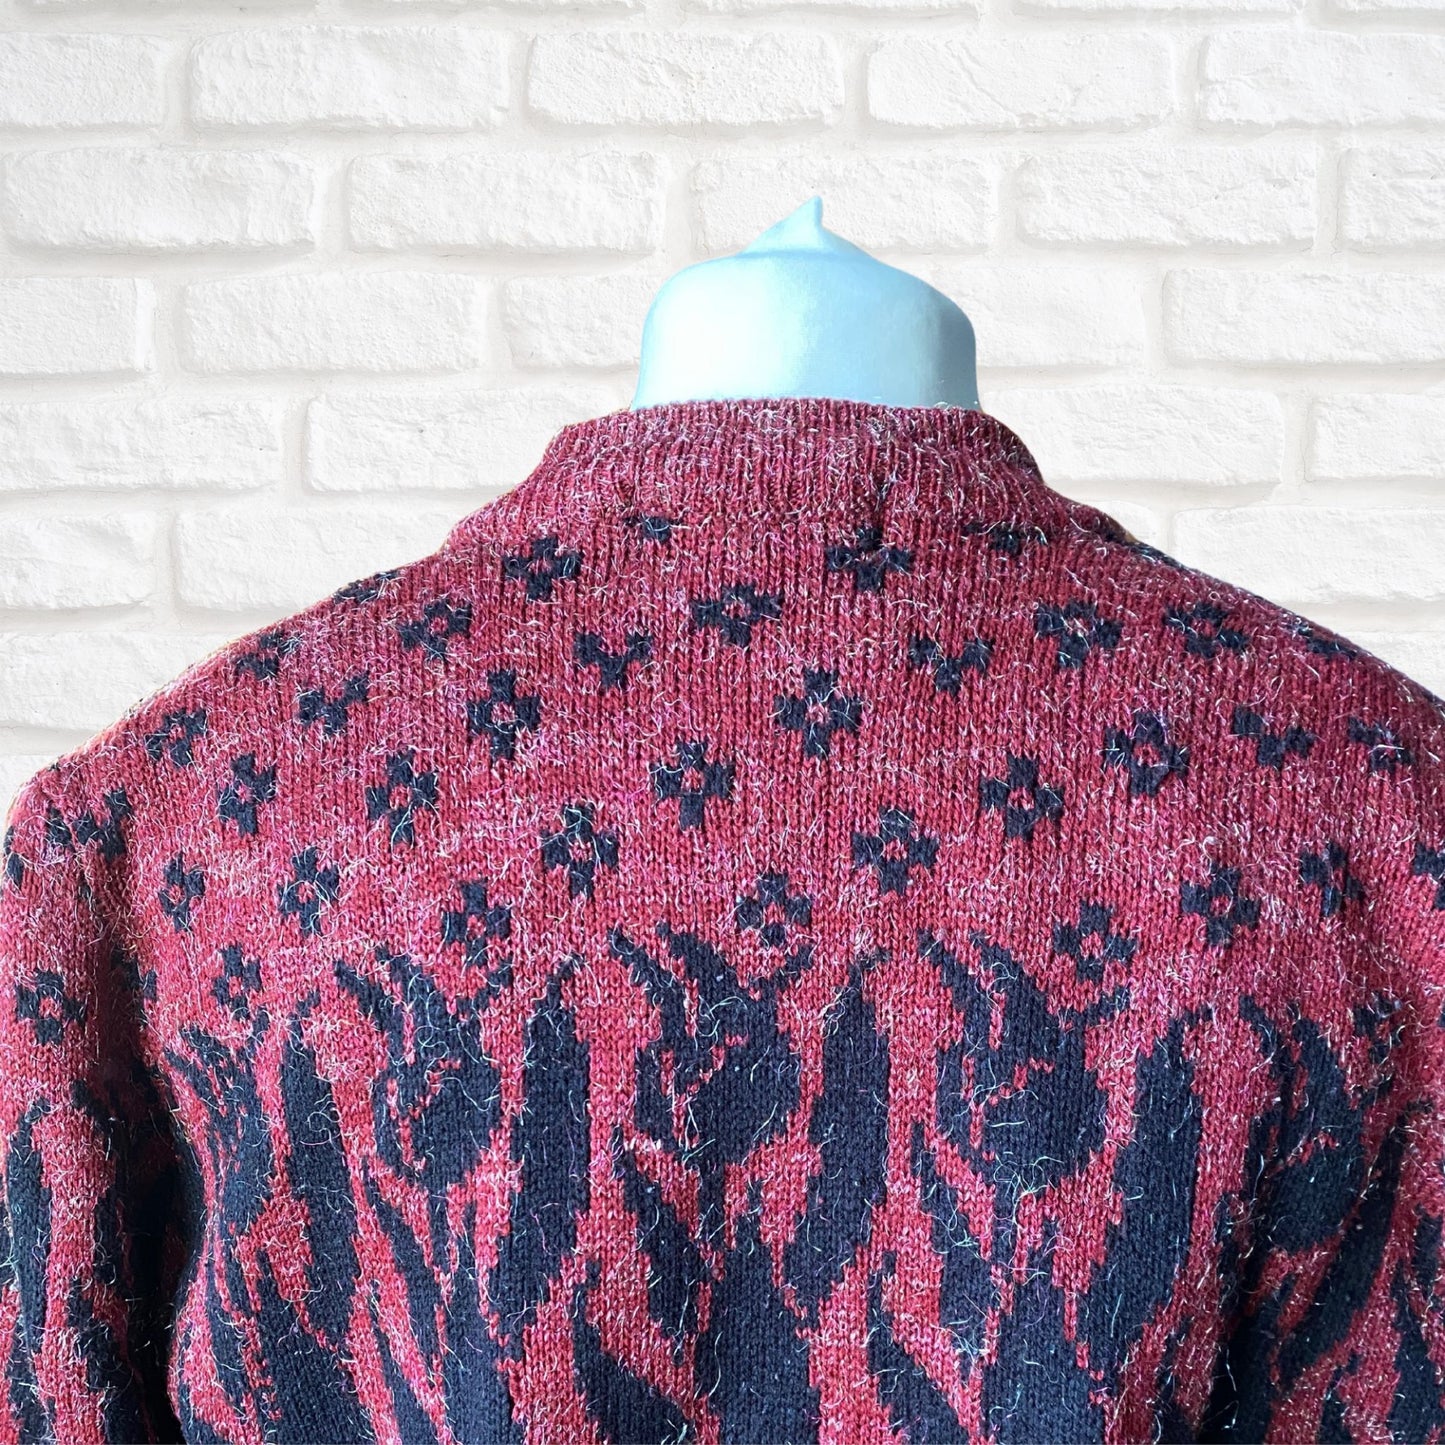 Vintage 80s Burgundy and Black Botanical Print Cardigan: Warm and Stylish Cover-Up. Approx UK size 14-18